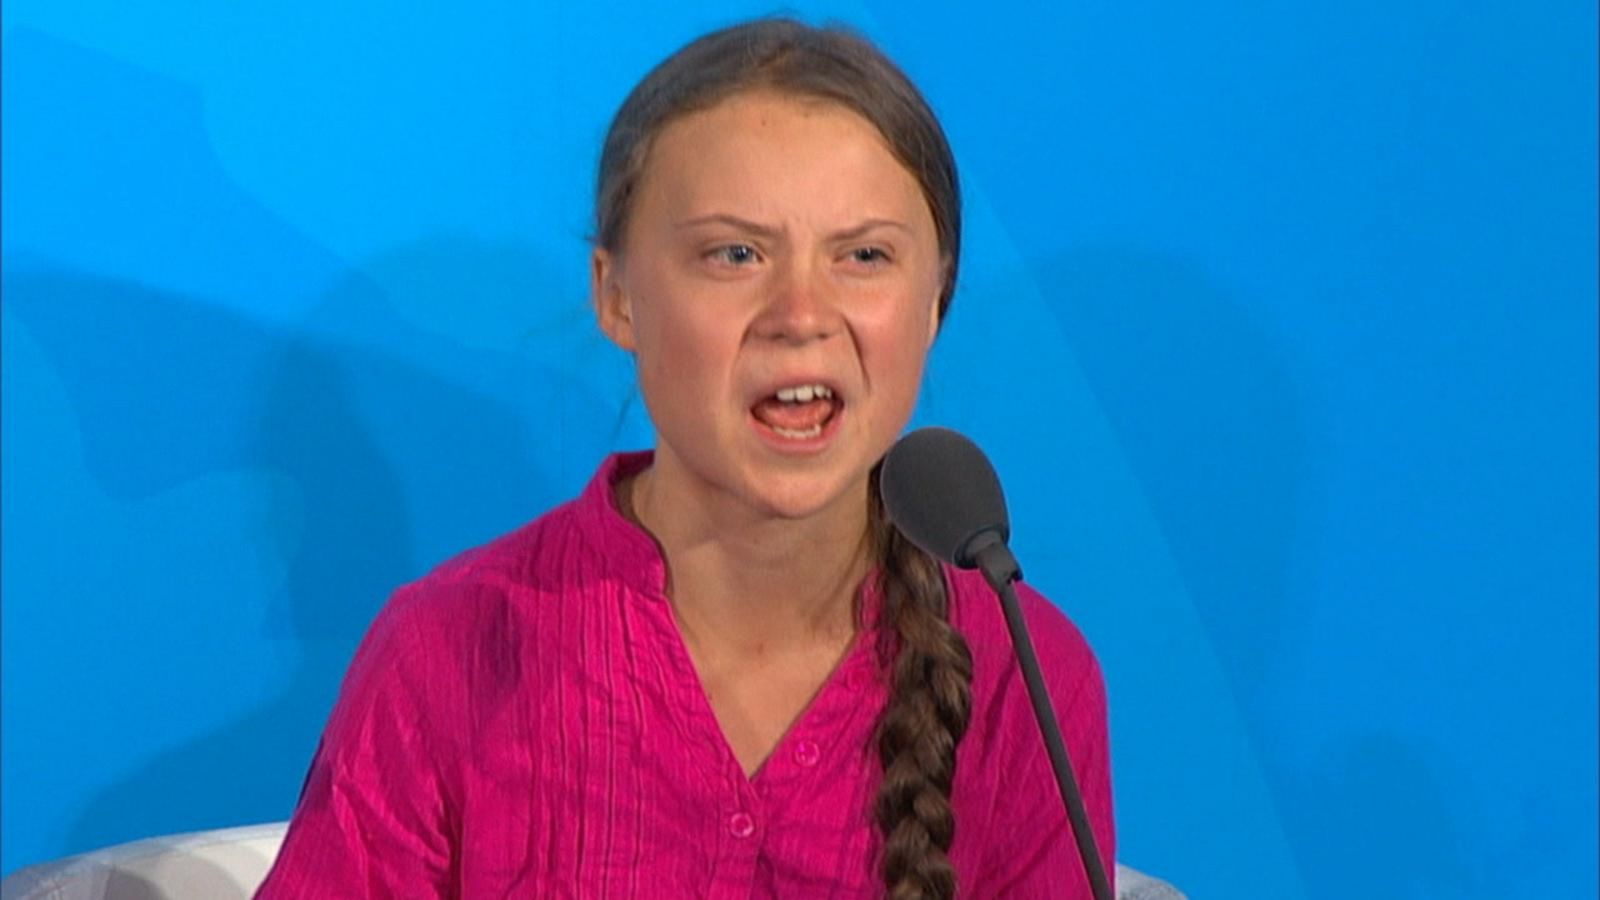 The Year 2019: Greta Thunberg, the ‘Squad’ and other young newsmakers ...